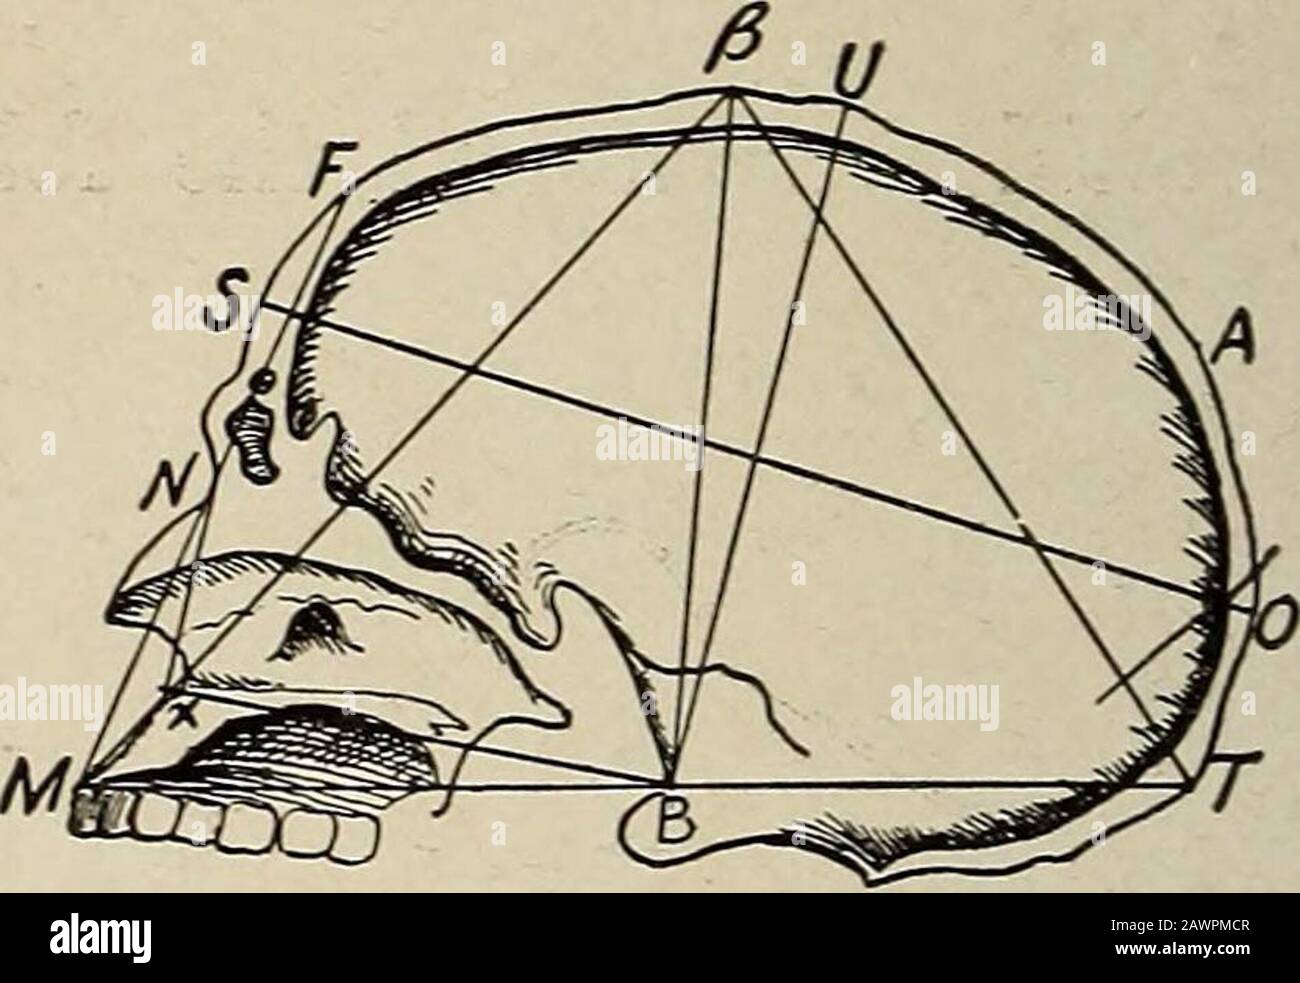 Nervous and mental diseases . 3tNAUR/C(/LAR-D/AM. ff/Fig. 276.. Fig. 277. ment of the distance between the basion and vertex of the skull (Bto /?, or U). A line from the external occipital protuberance to thelowest median point of the superior maxilla, just above the incisors (Tto M), passes almost directly through the basion. Hence, in cephal-ometry, by taking this diameter and the radii from each extremity tothe bregma, we have a triangle (31, ft, T) whose height (B, /5) is easilyascertained. The height averages 13.3 cm. in men, 12.3 in women,and the physiological variation is from 11.5 to 1 Stock Photo